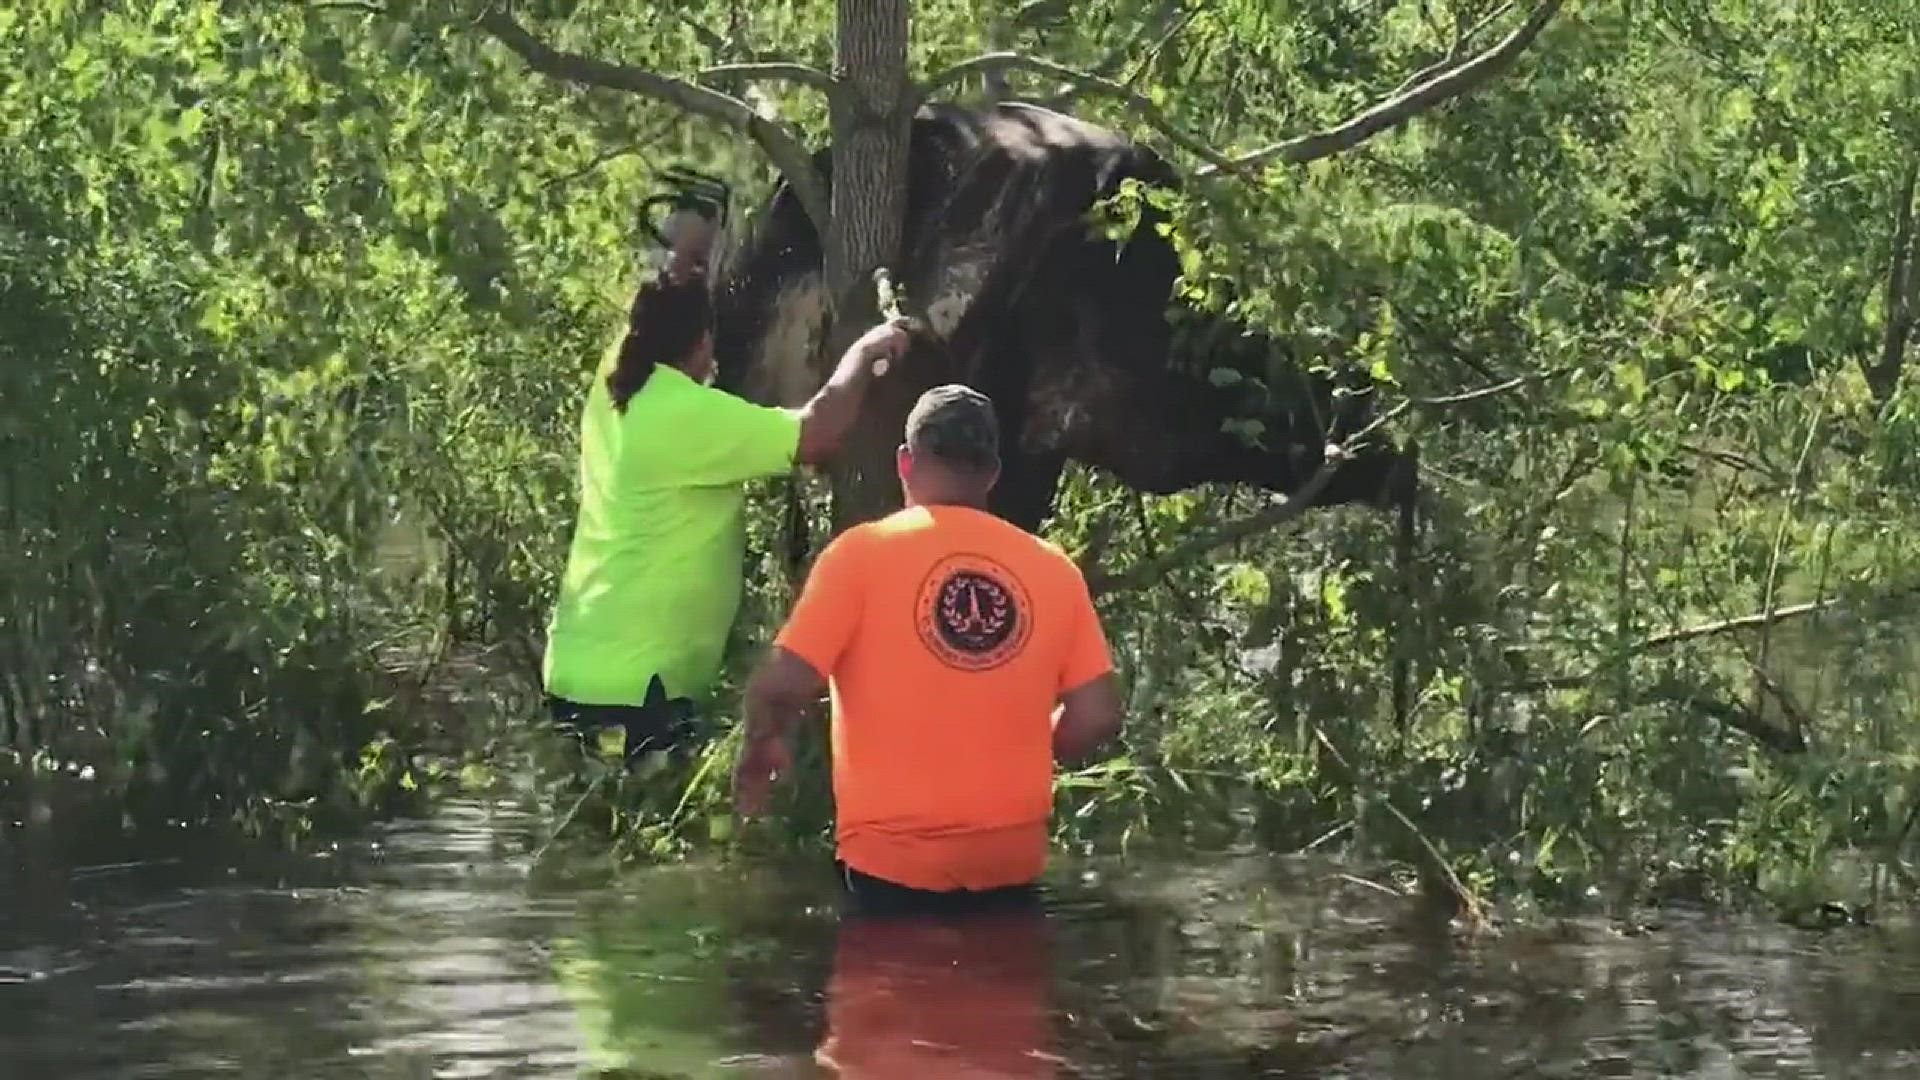 Cow rescued from tree in St. Bernard Parish